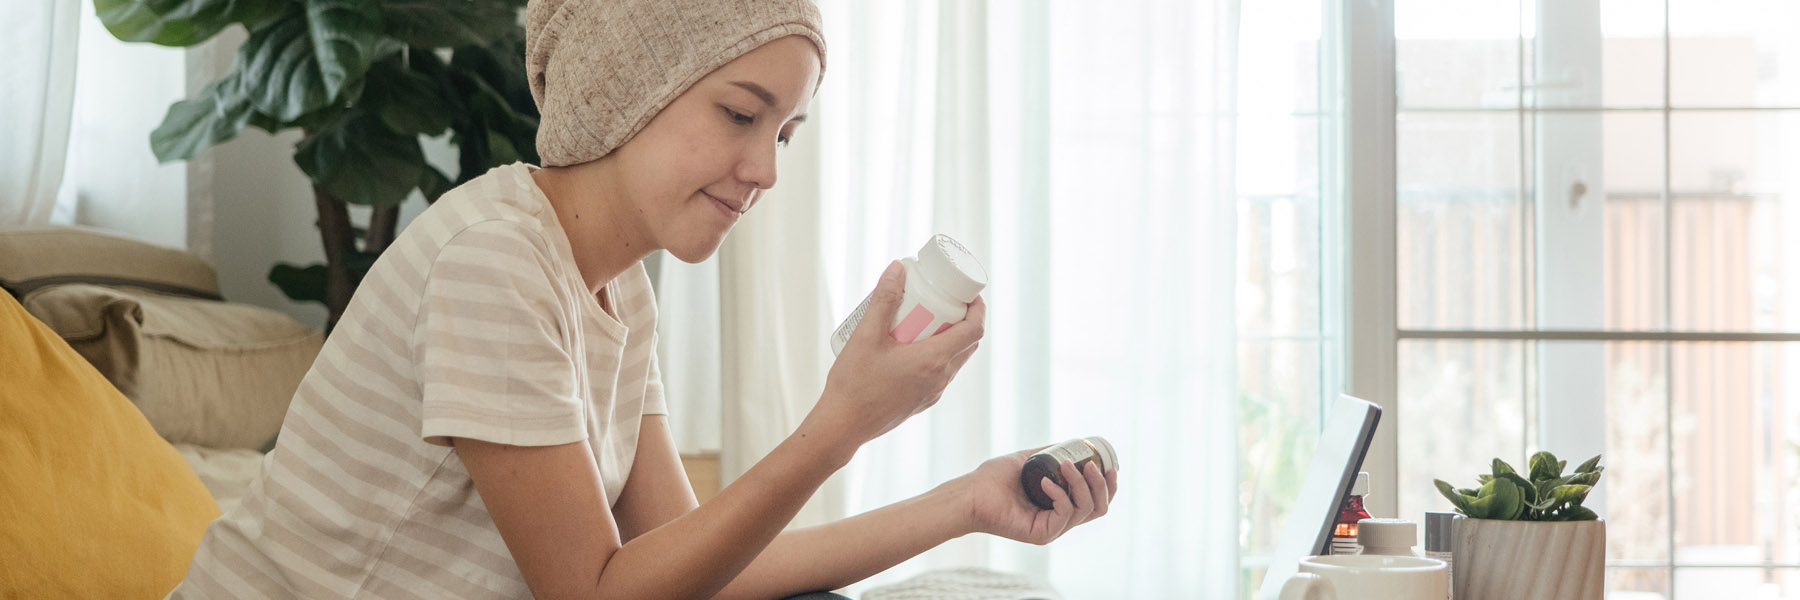 Young female cancer patient wearing a head covering reading the labels on her medication bottles